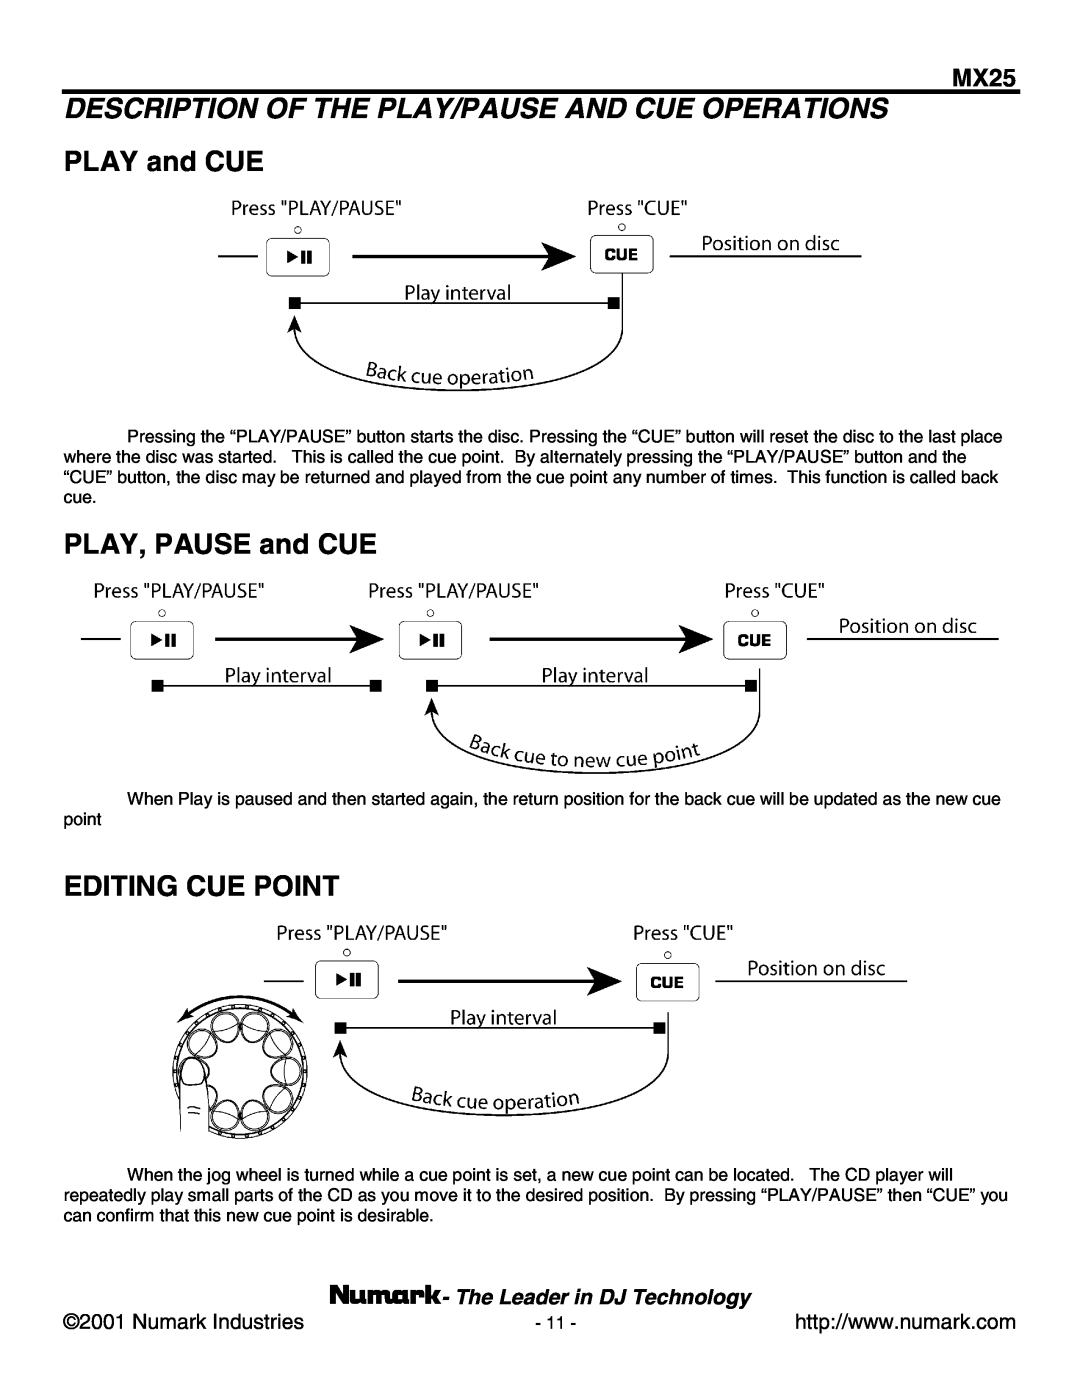 Numark Industries MX25 manual Description Of The Play/Pause And Cue Operations, PLAY and CUE, PLAY, PAUSE and CUE 